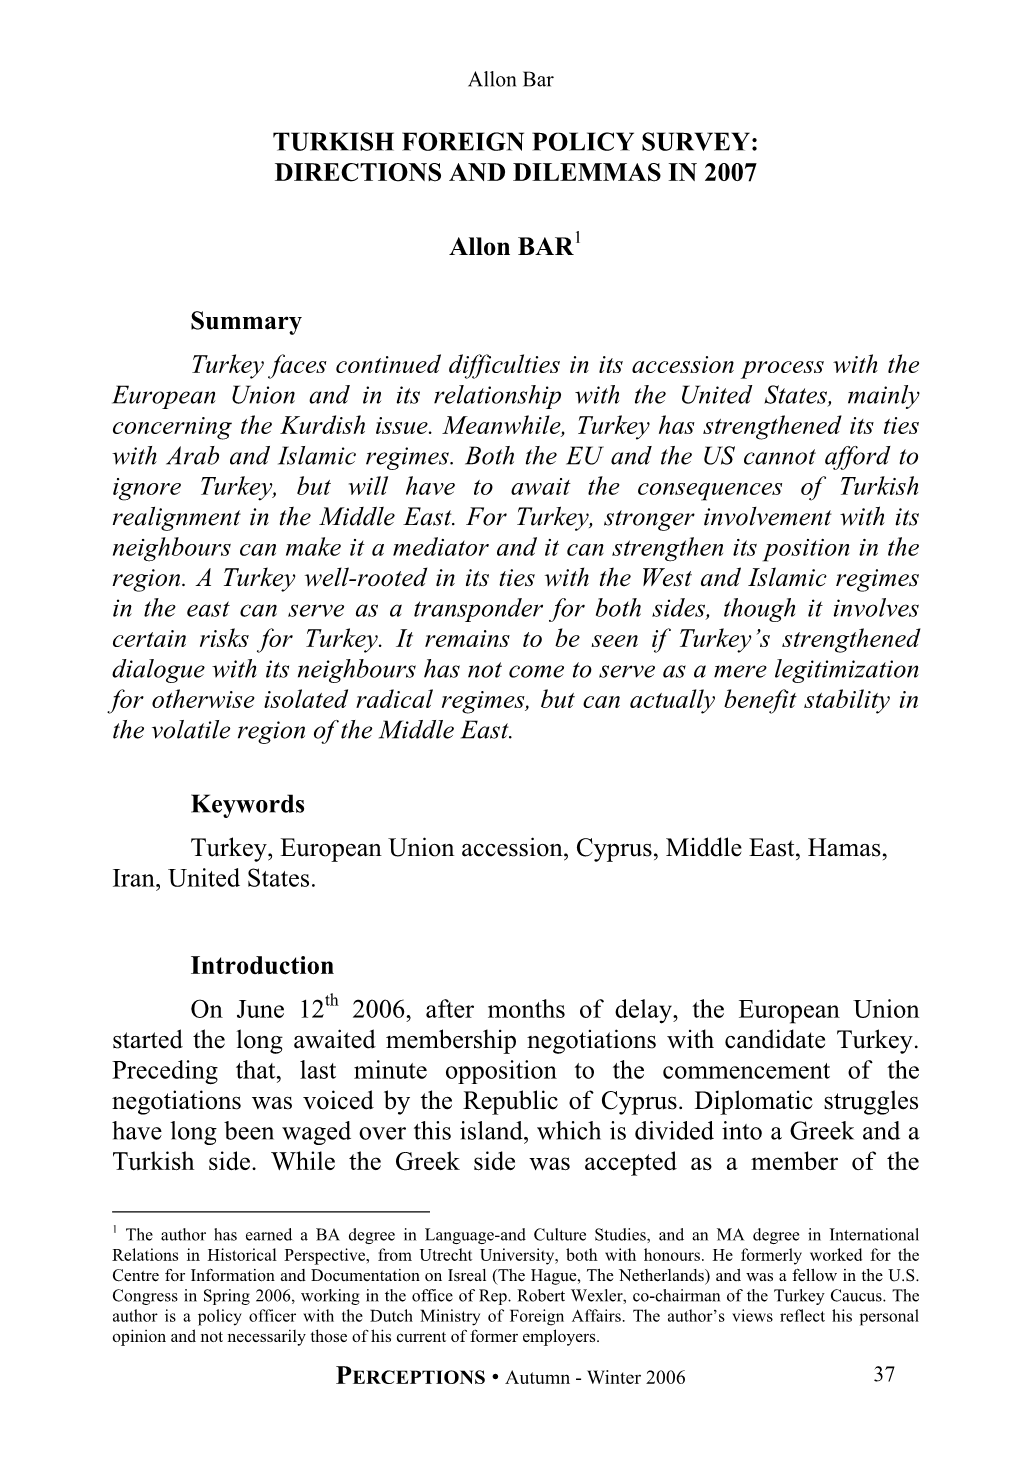 Turkish Foreign Policy Survey: Directions and Dilemmas in 2007